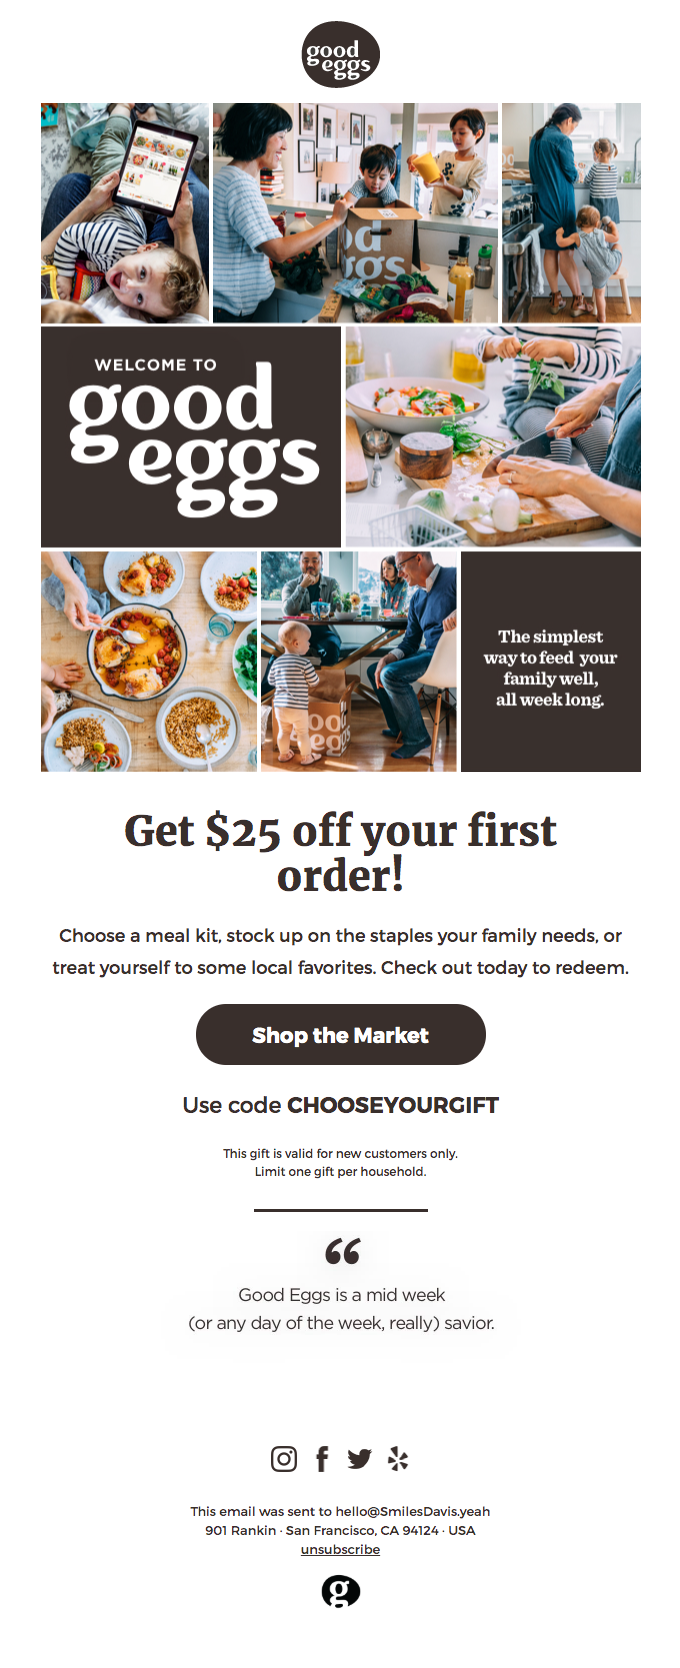 Welcome! Get $25 Off Your 1st Order